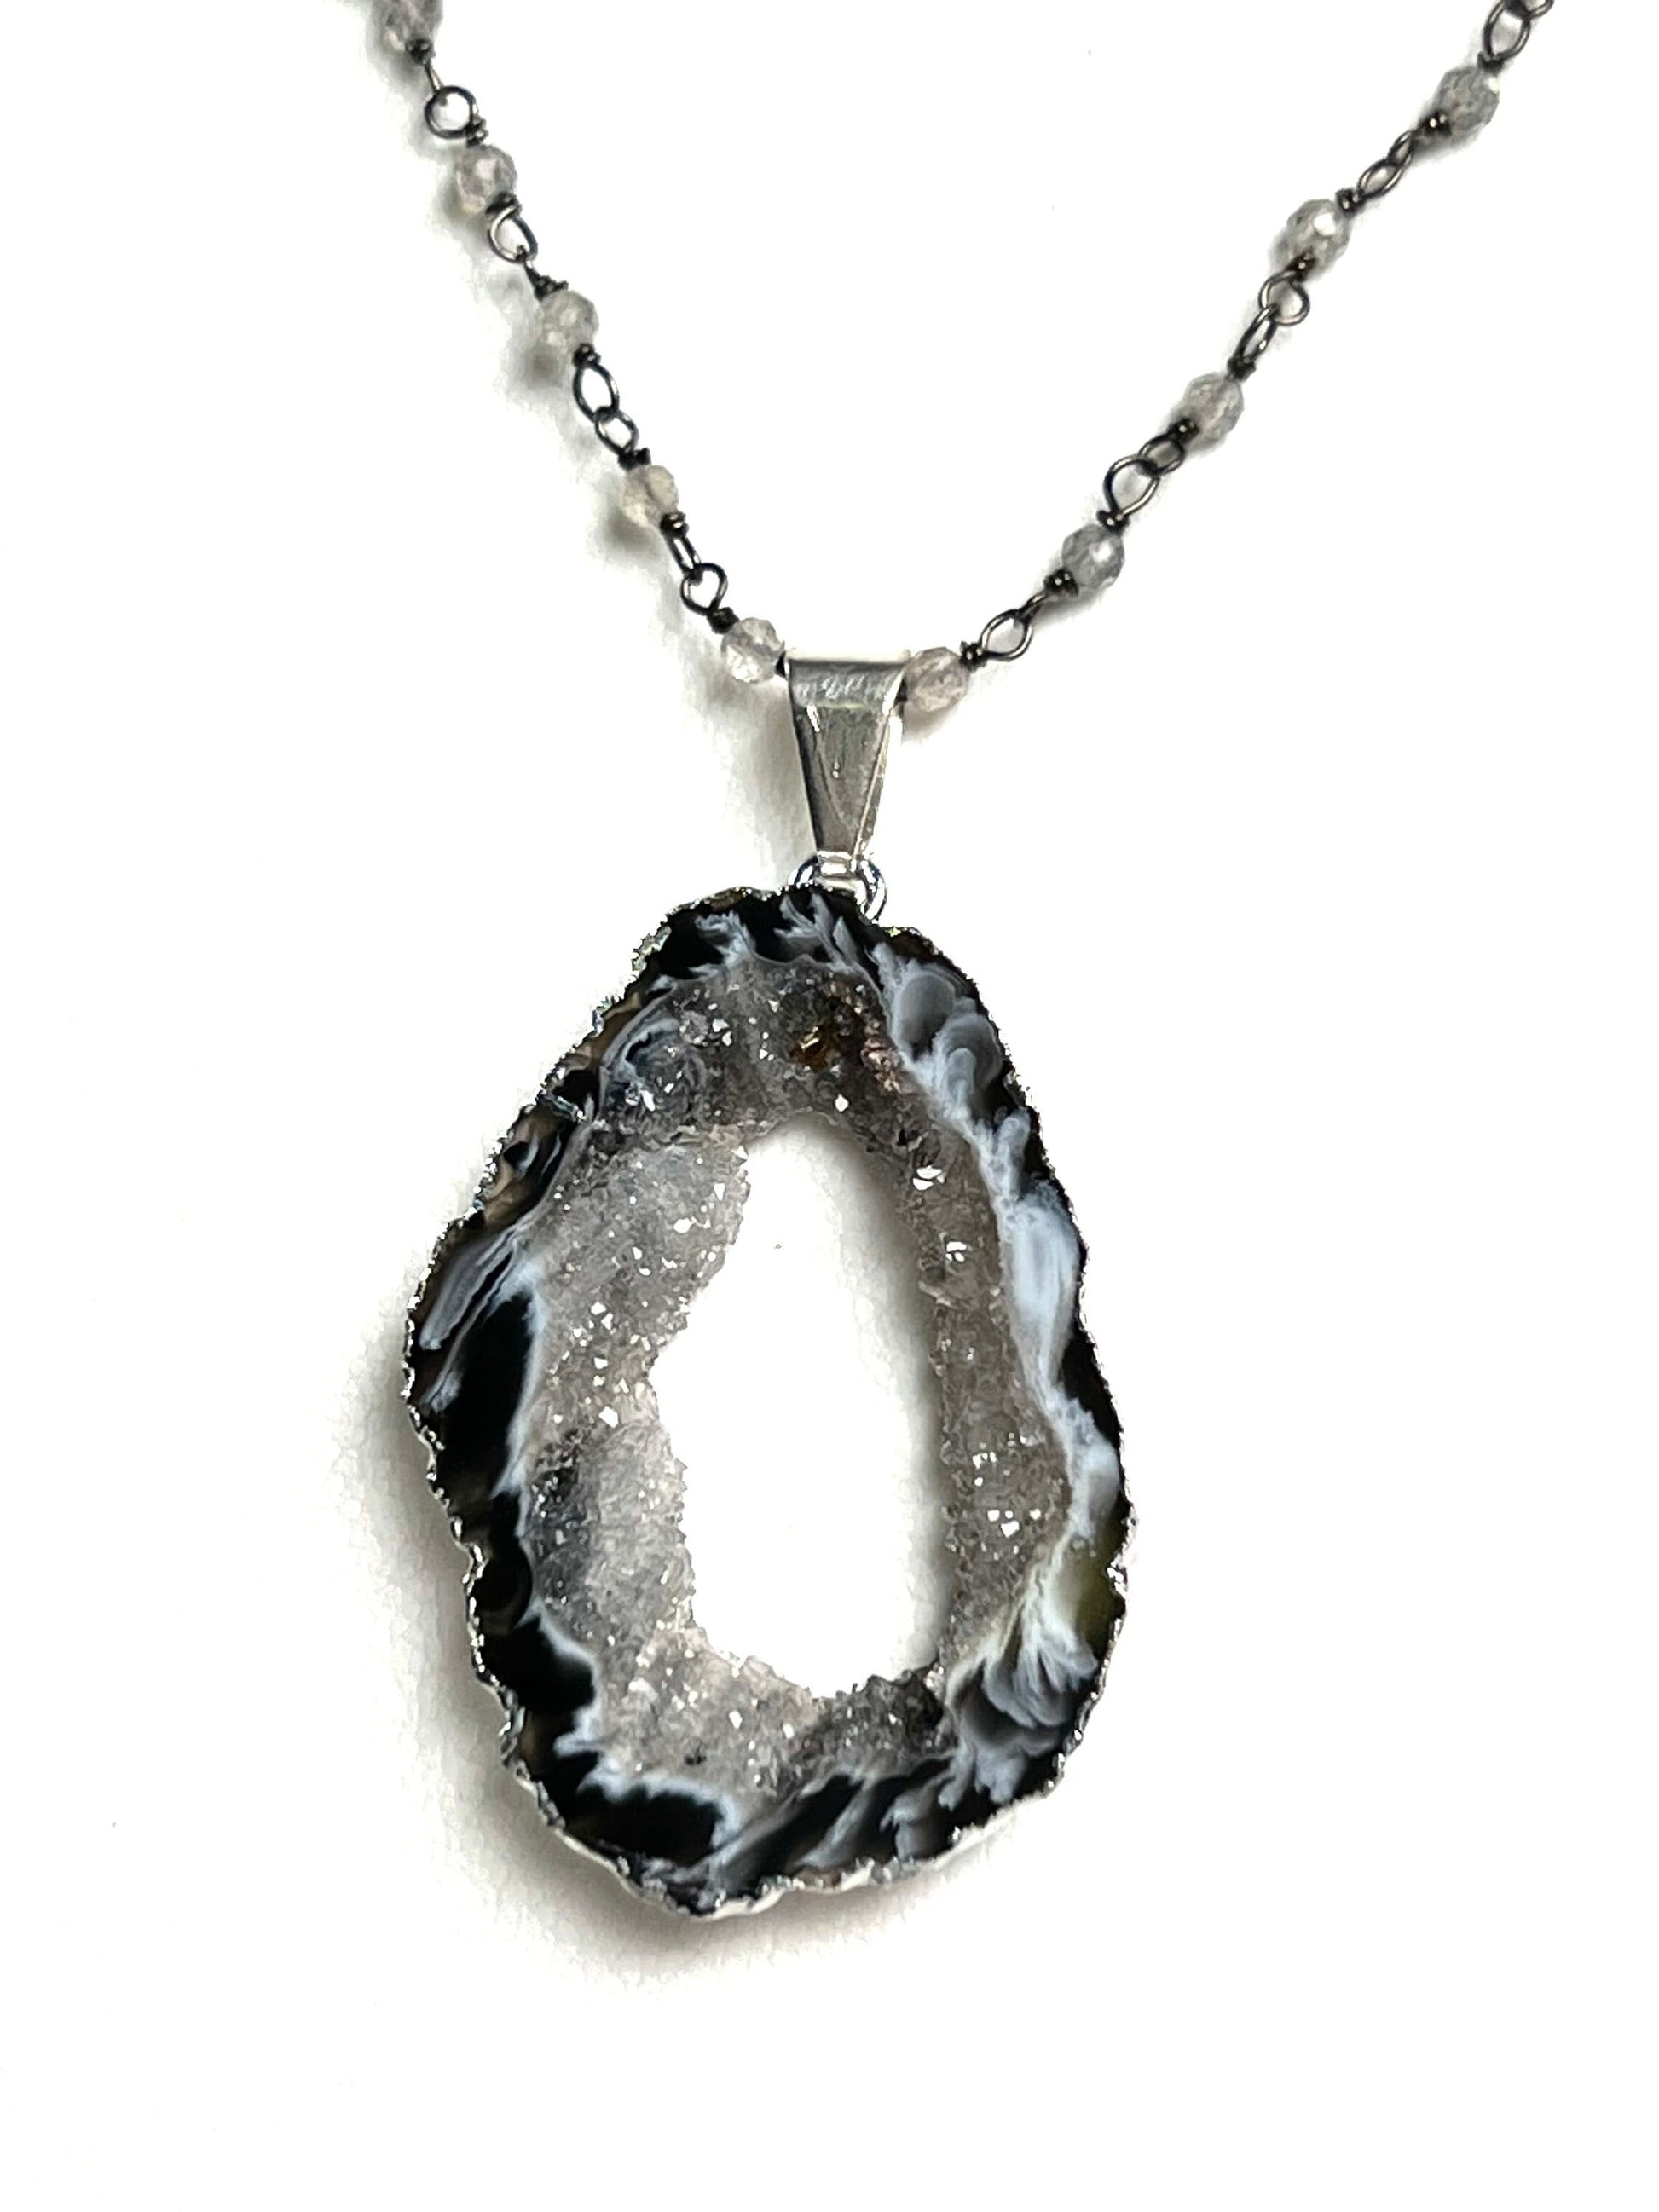 Genuine Botswana Agate Druzy Geode Gemstone Pendant and Silver Faceted Labradorite Beaded Rosary Chain Necklace